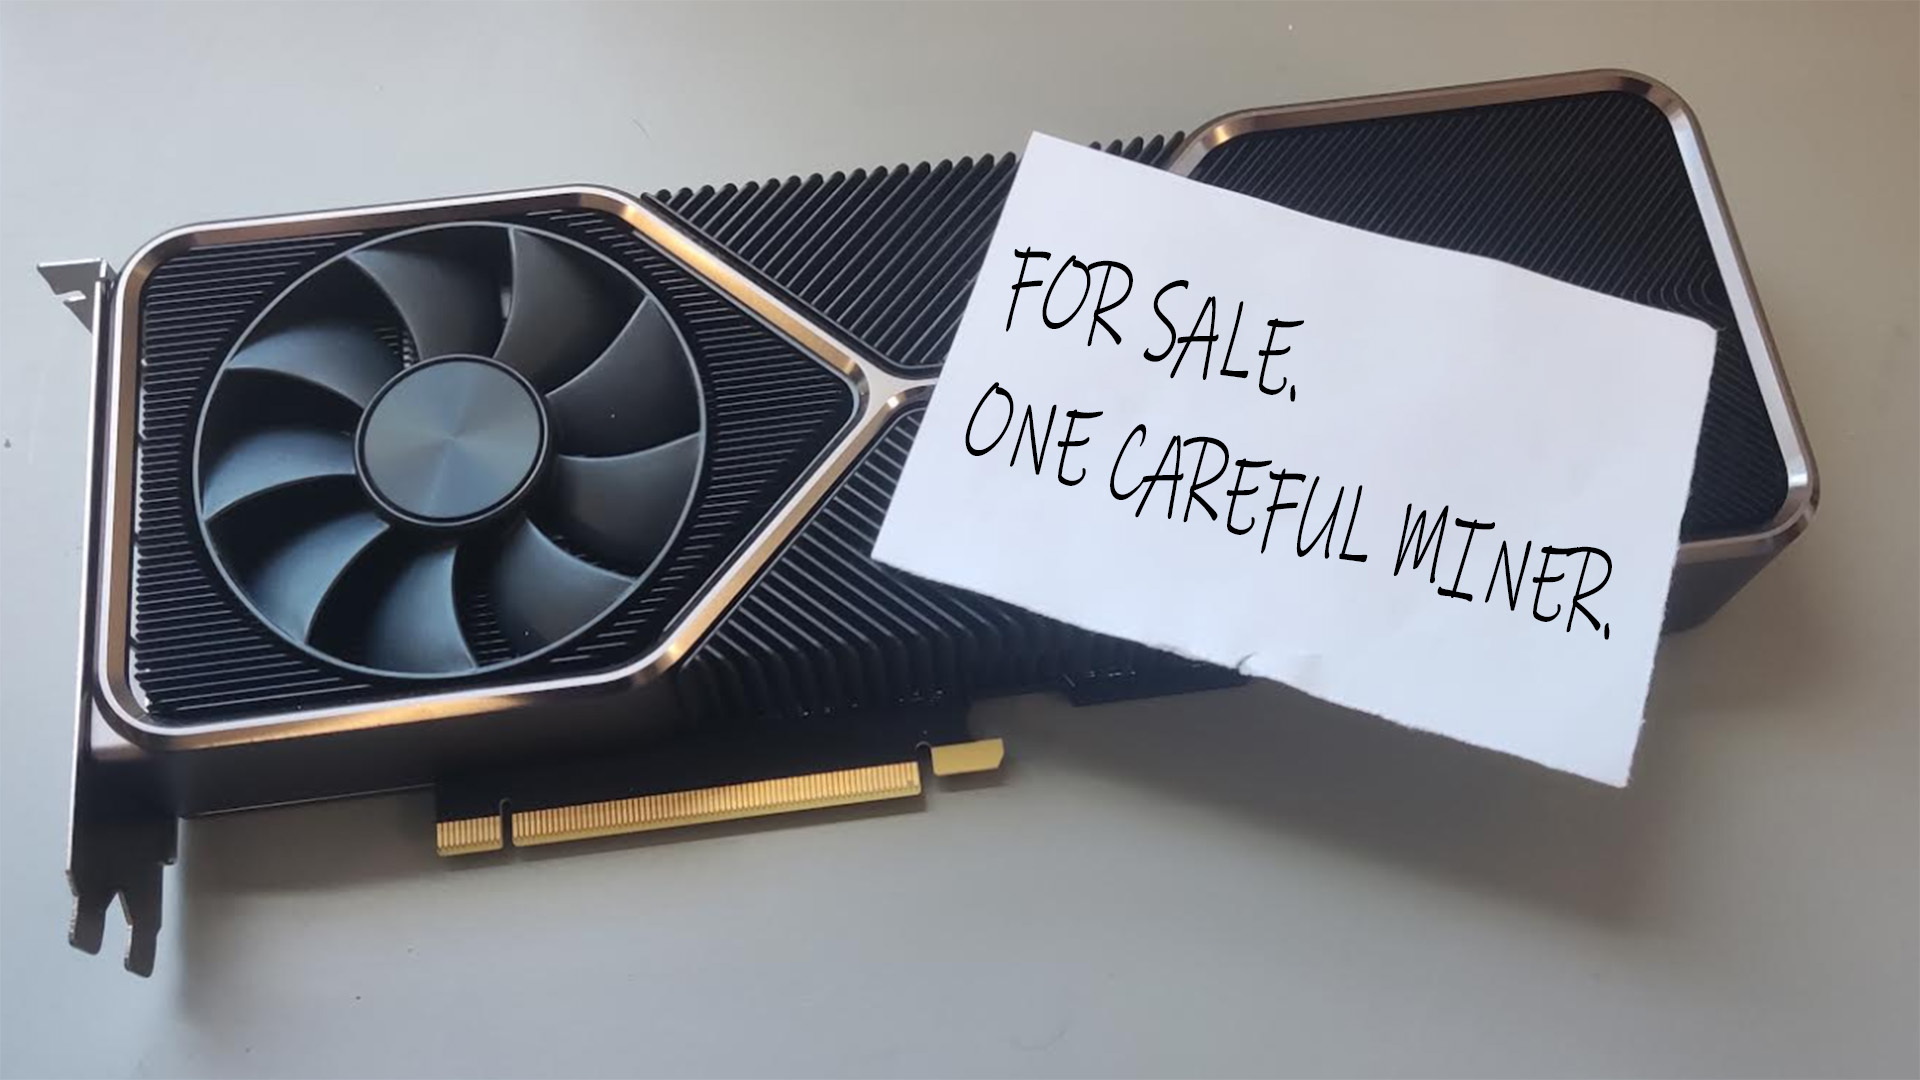 How To Buy A Graphics Card